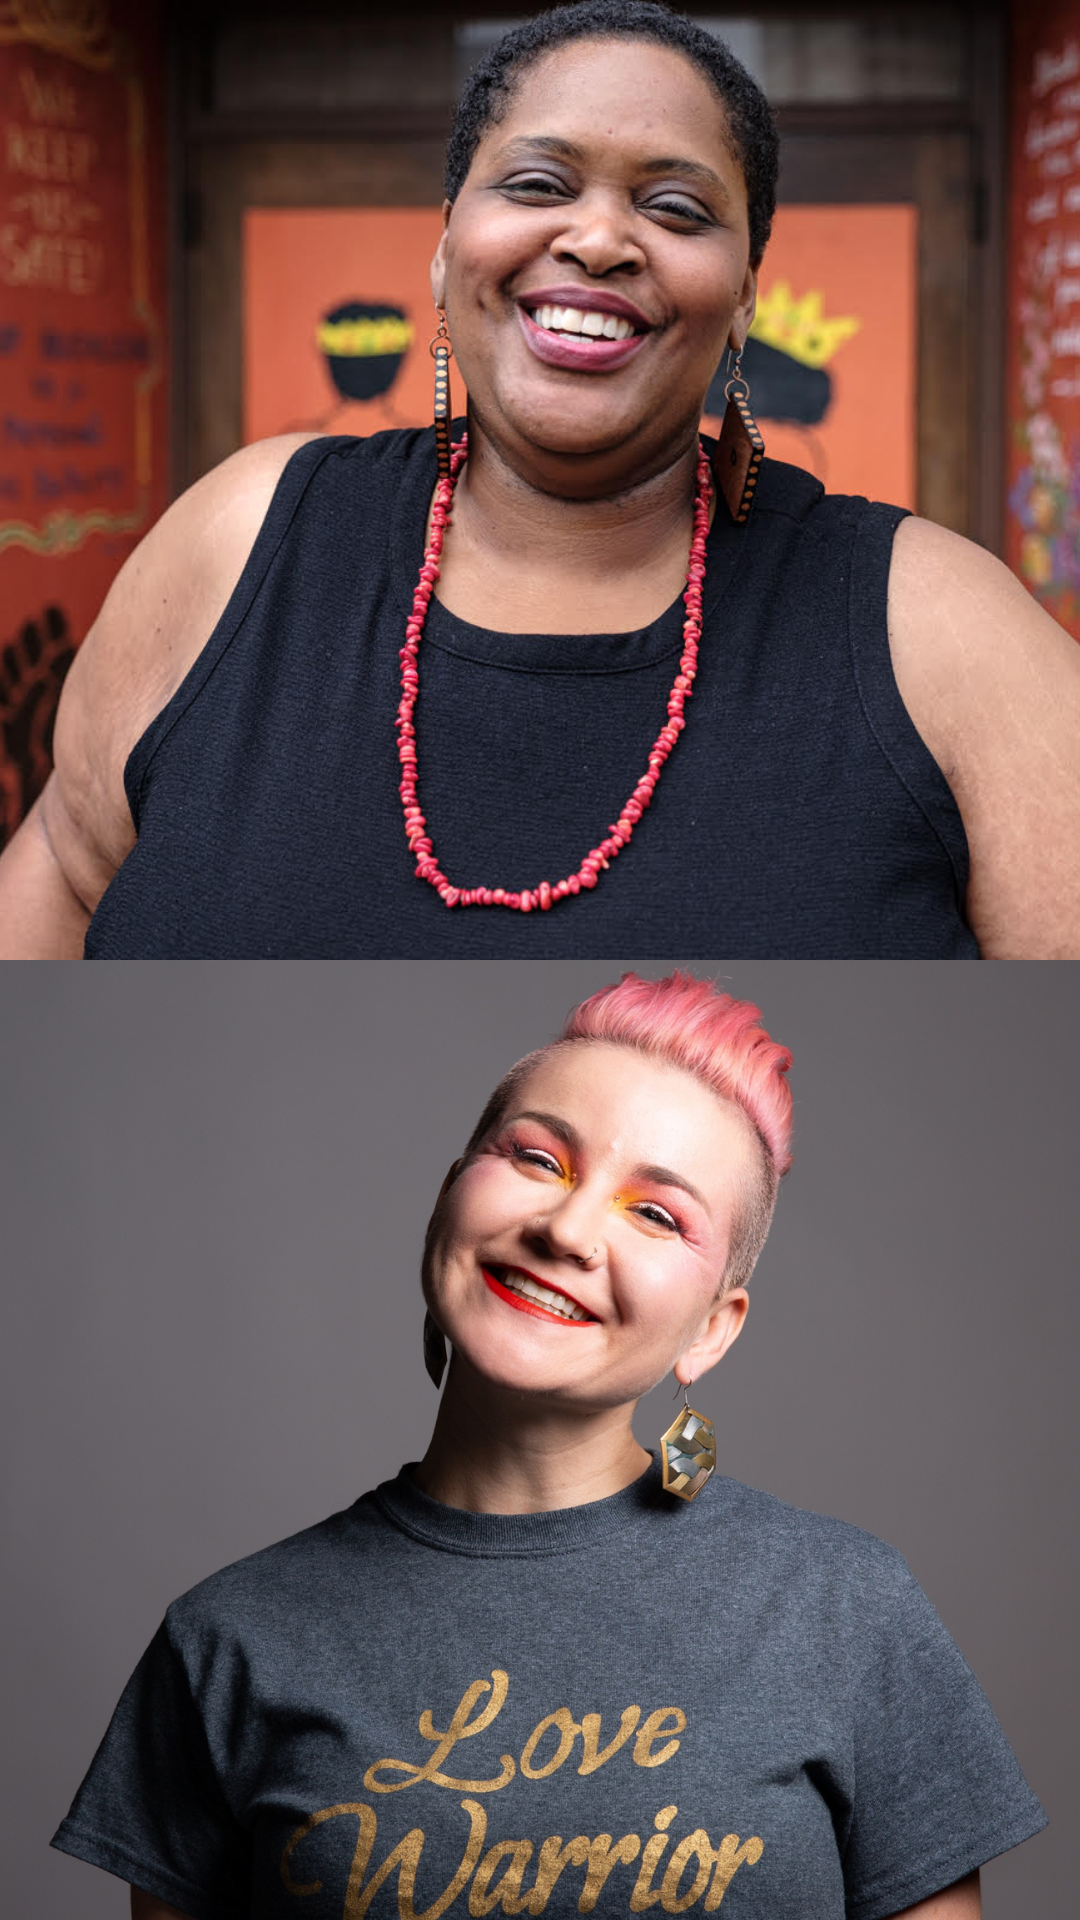 A photo of Valerie Troutt, a radiant queer Black woman wearing big earrings, a coral necklace and an infectious smile. Underneath it, a photo of Lisa Forkish, a queer white woman with pink hair, big earrings, glowing smile and a shirt that says &quot;Love Warrior&quot; on it